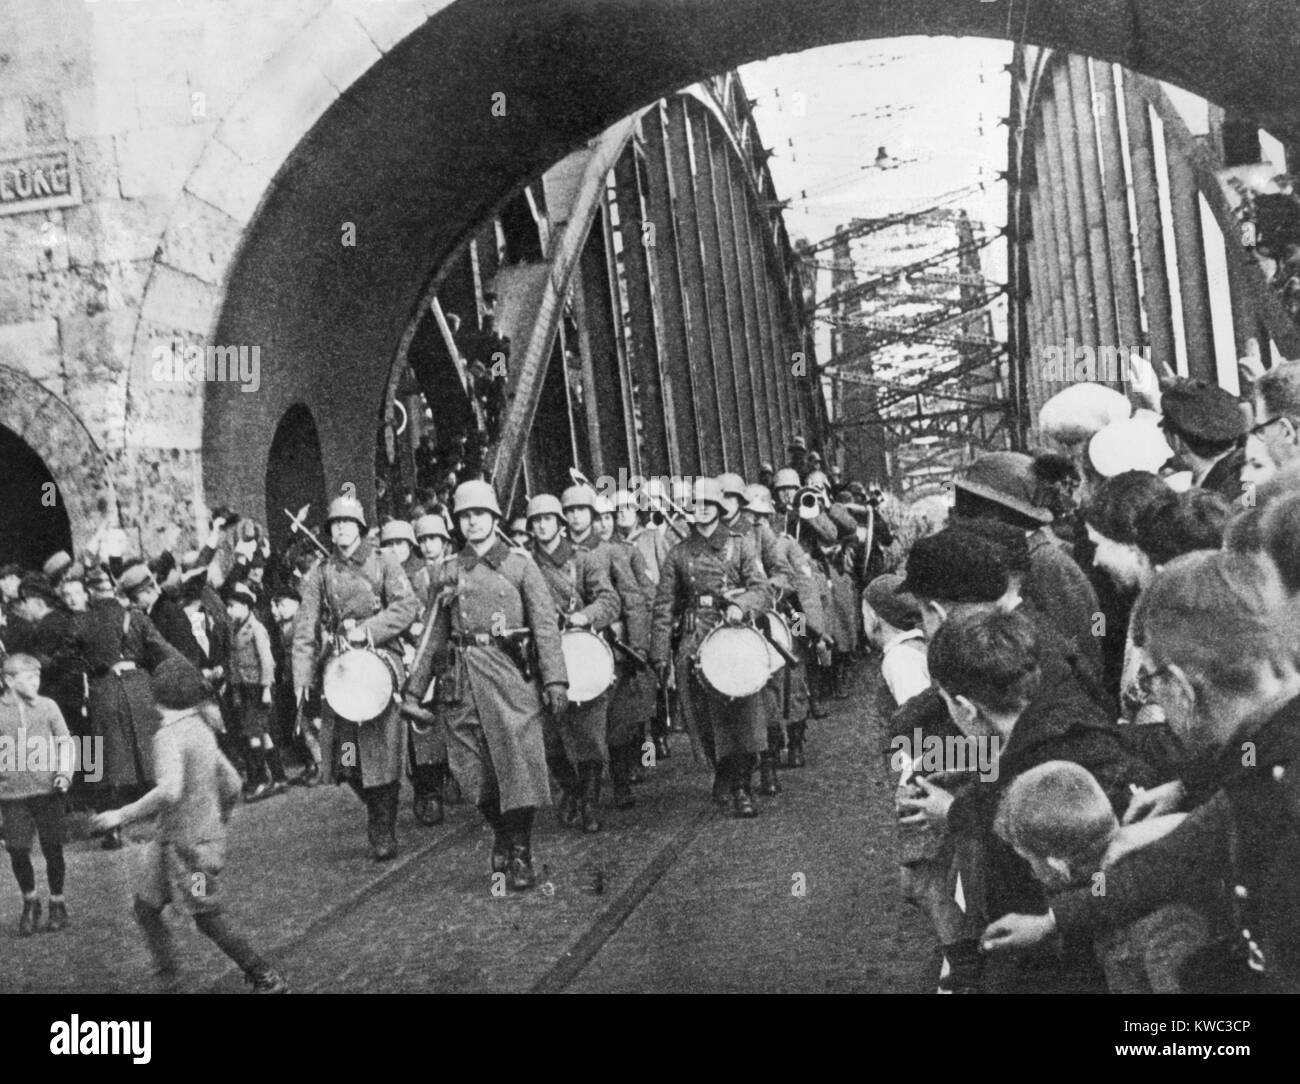 German troops march across the Hohenzollern Bridge to re-occupy Cologne and the Rhineland. March 7, 1936. This violated the terms of the Treaty of Versailles and the Locarno Treaties, but met no military resistance, or diplomatic sanctions. World War 2 (BSLOC 2015 13 48) Stock Photo